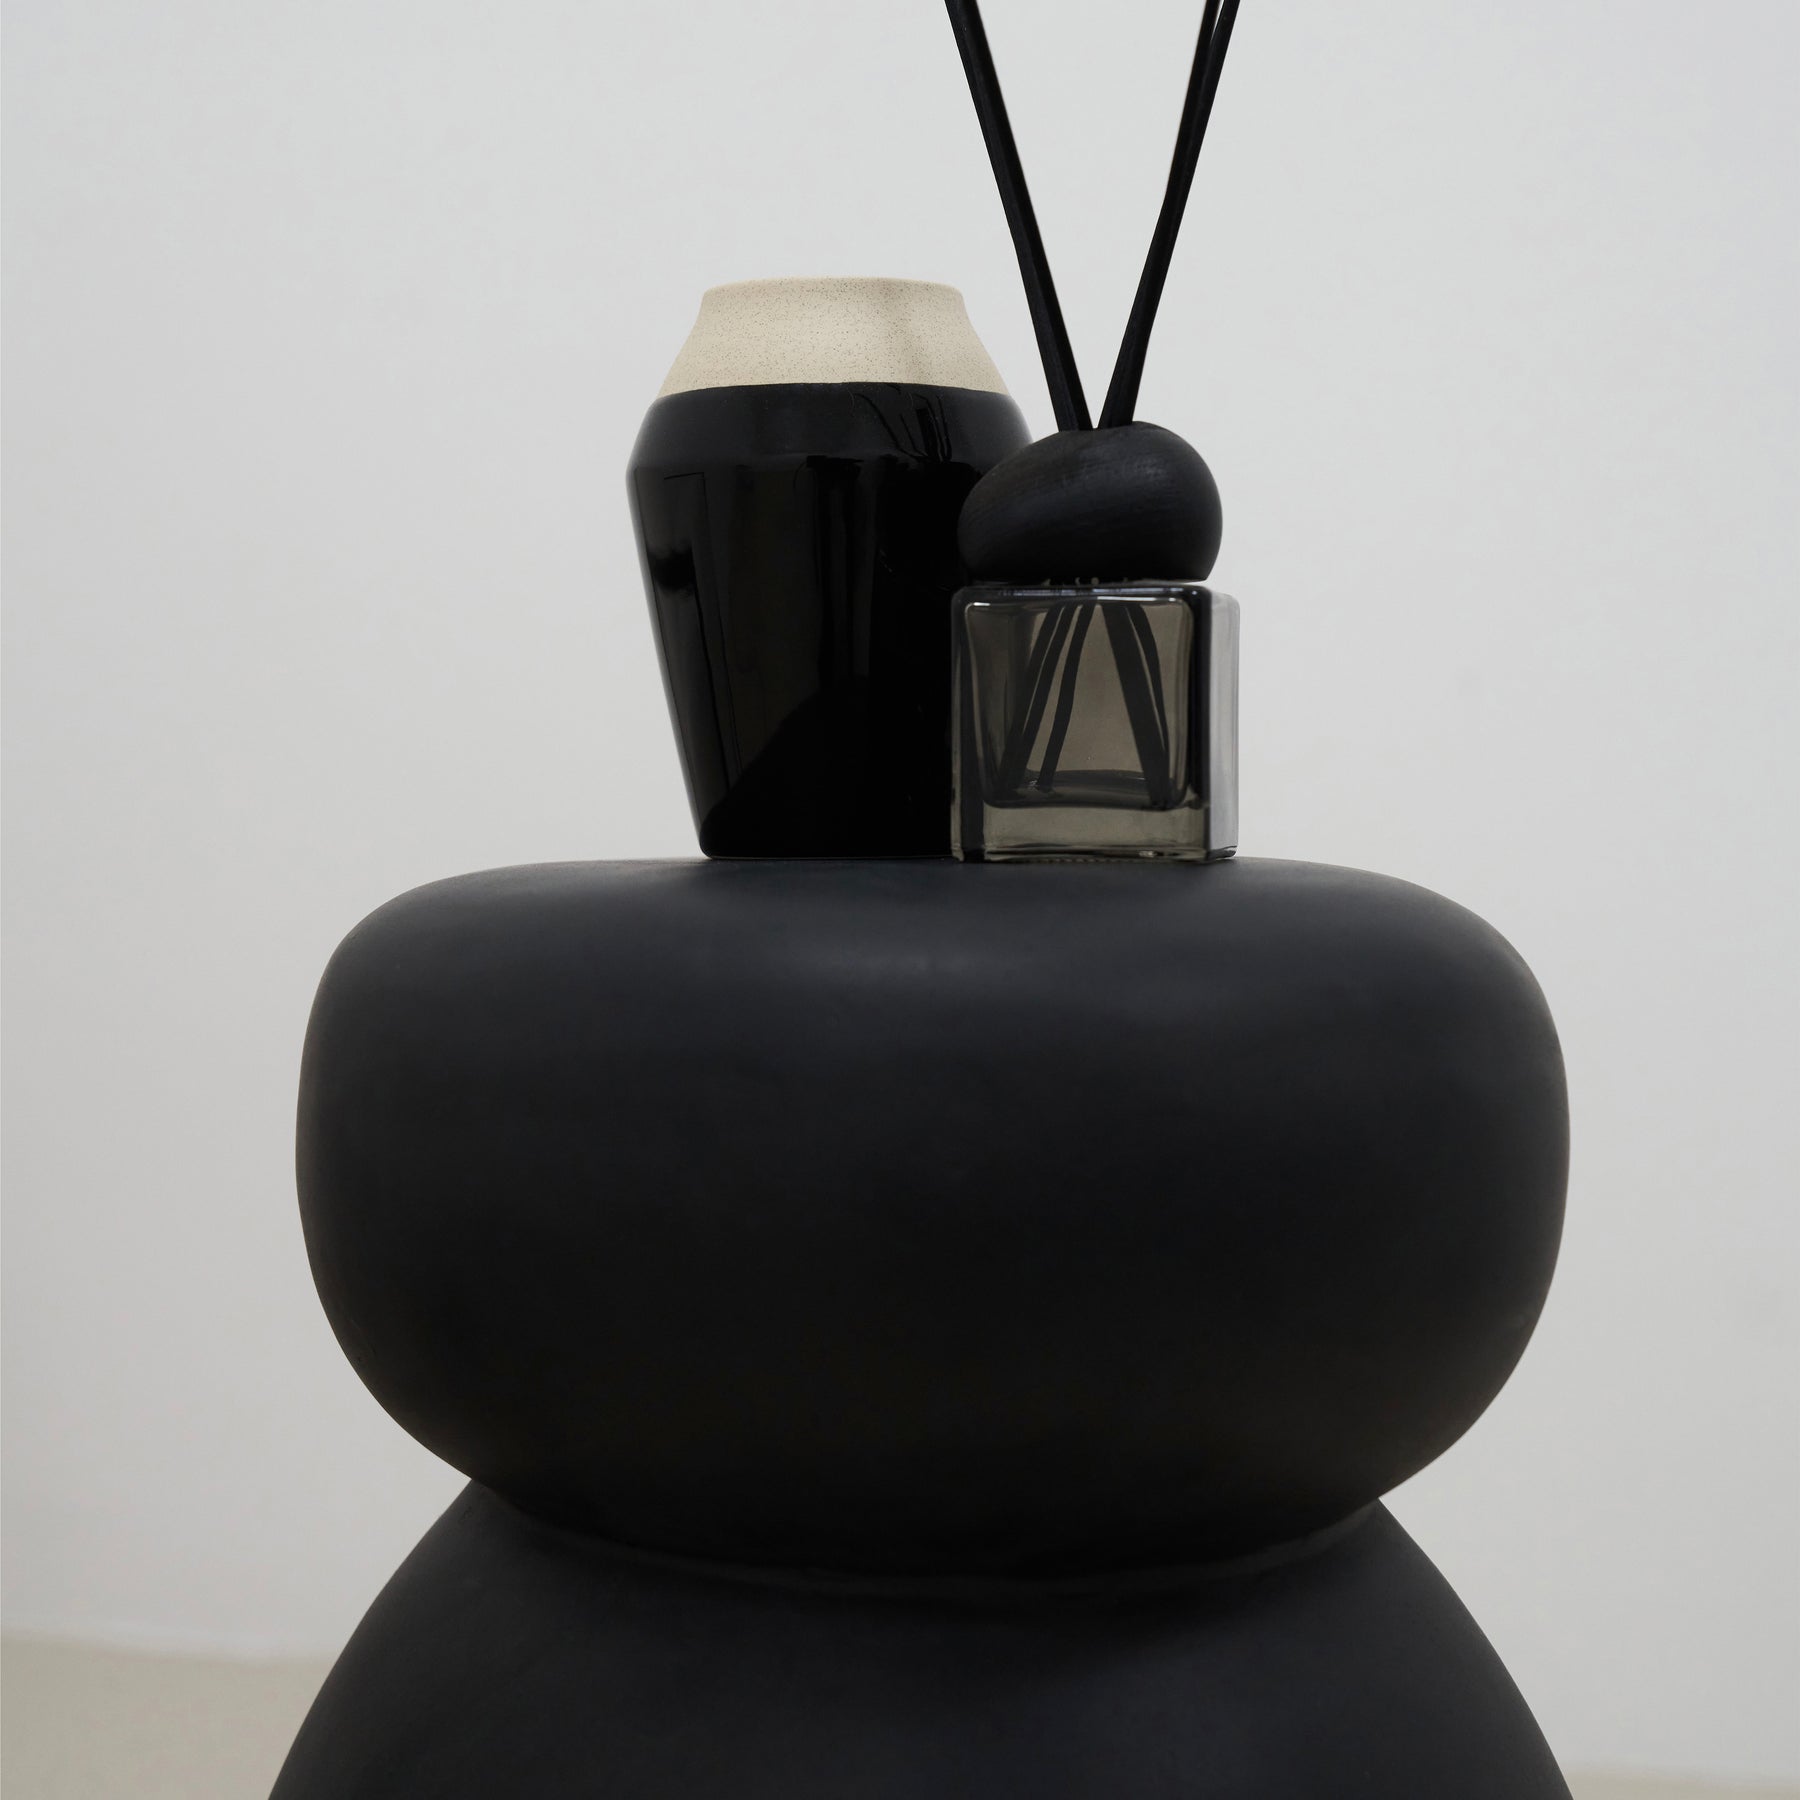 detail shot of Minimal Onyx Side Table ornaments